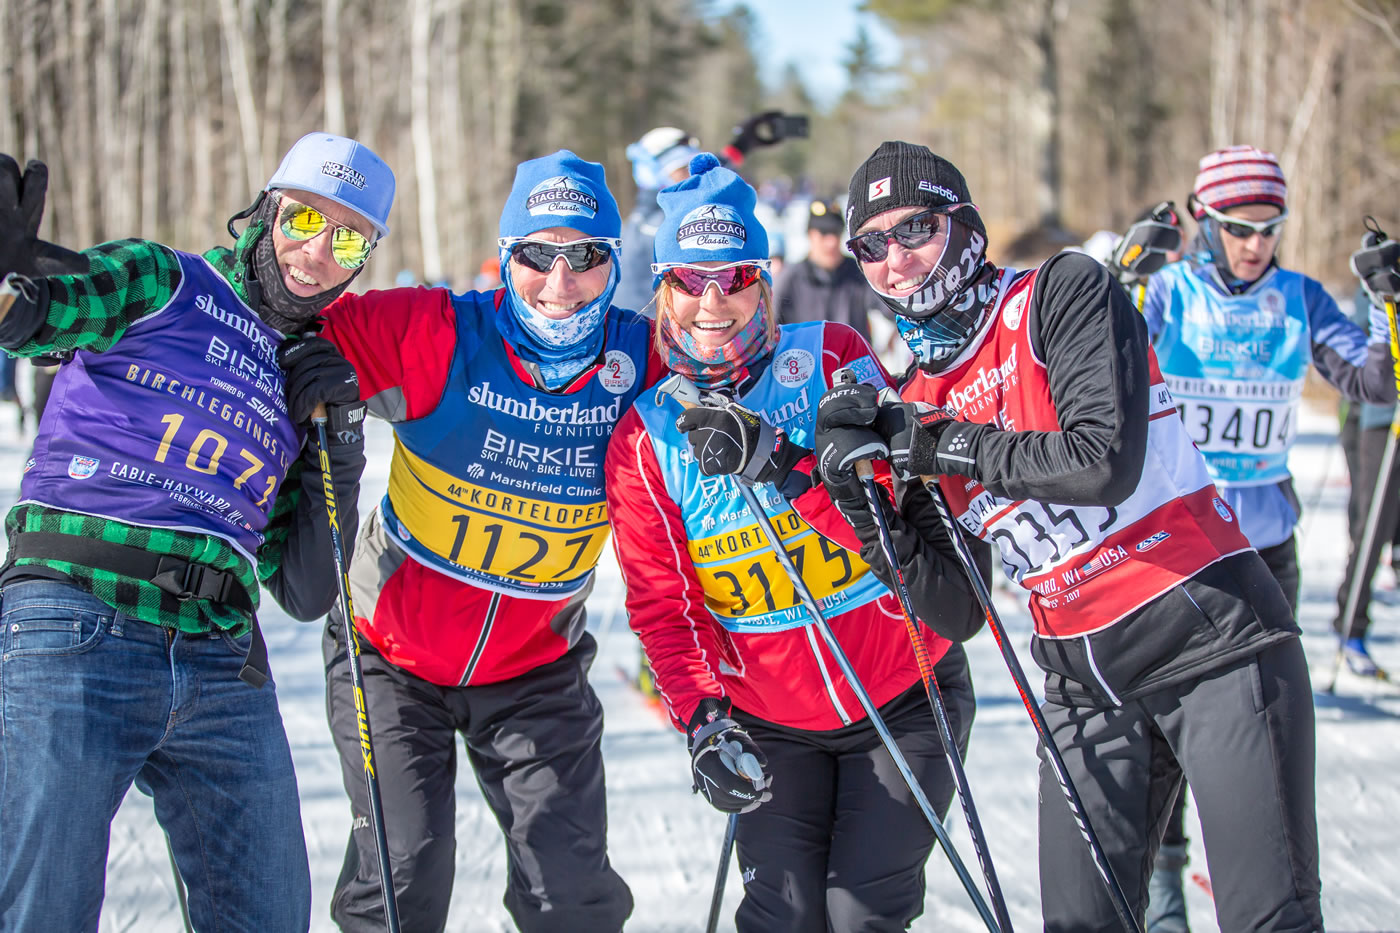 Many Birkie fans made the most of imperfect conditions and strapped on the skinny skis for a few laps of the 5km loop at Birkie Fest. [Photo] Courtesy of ©American Birkebeiner Ski Foundation